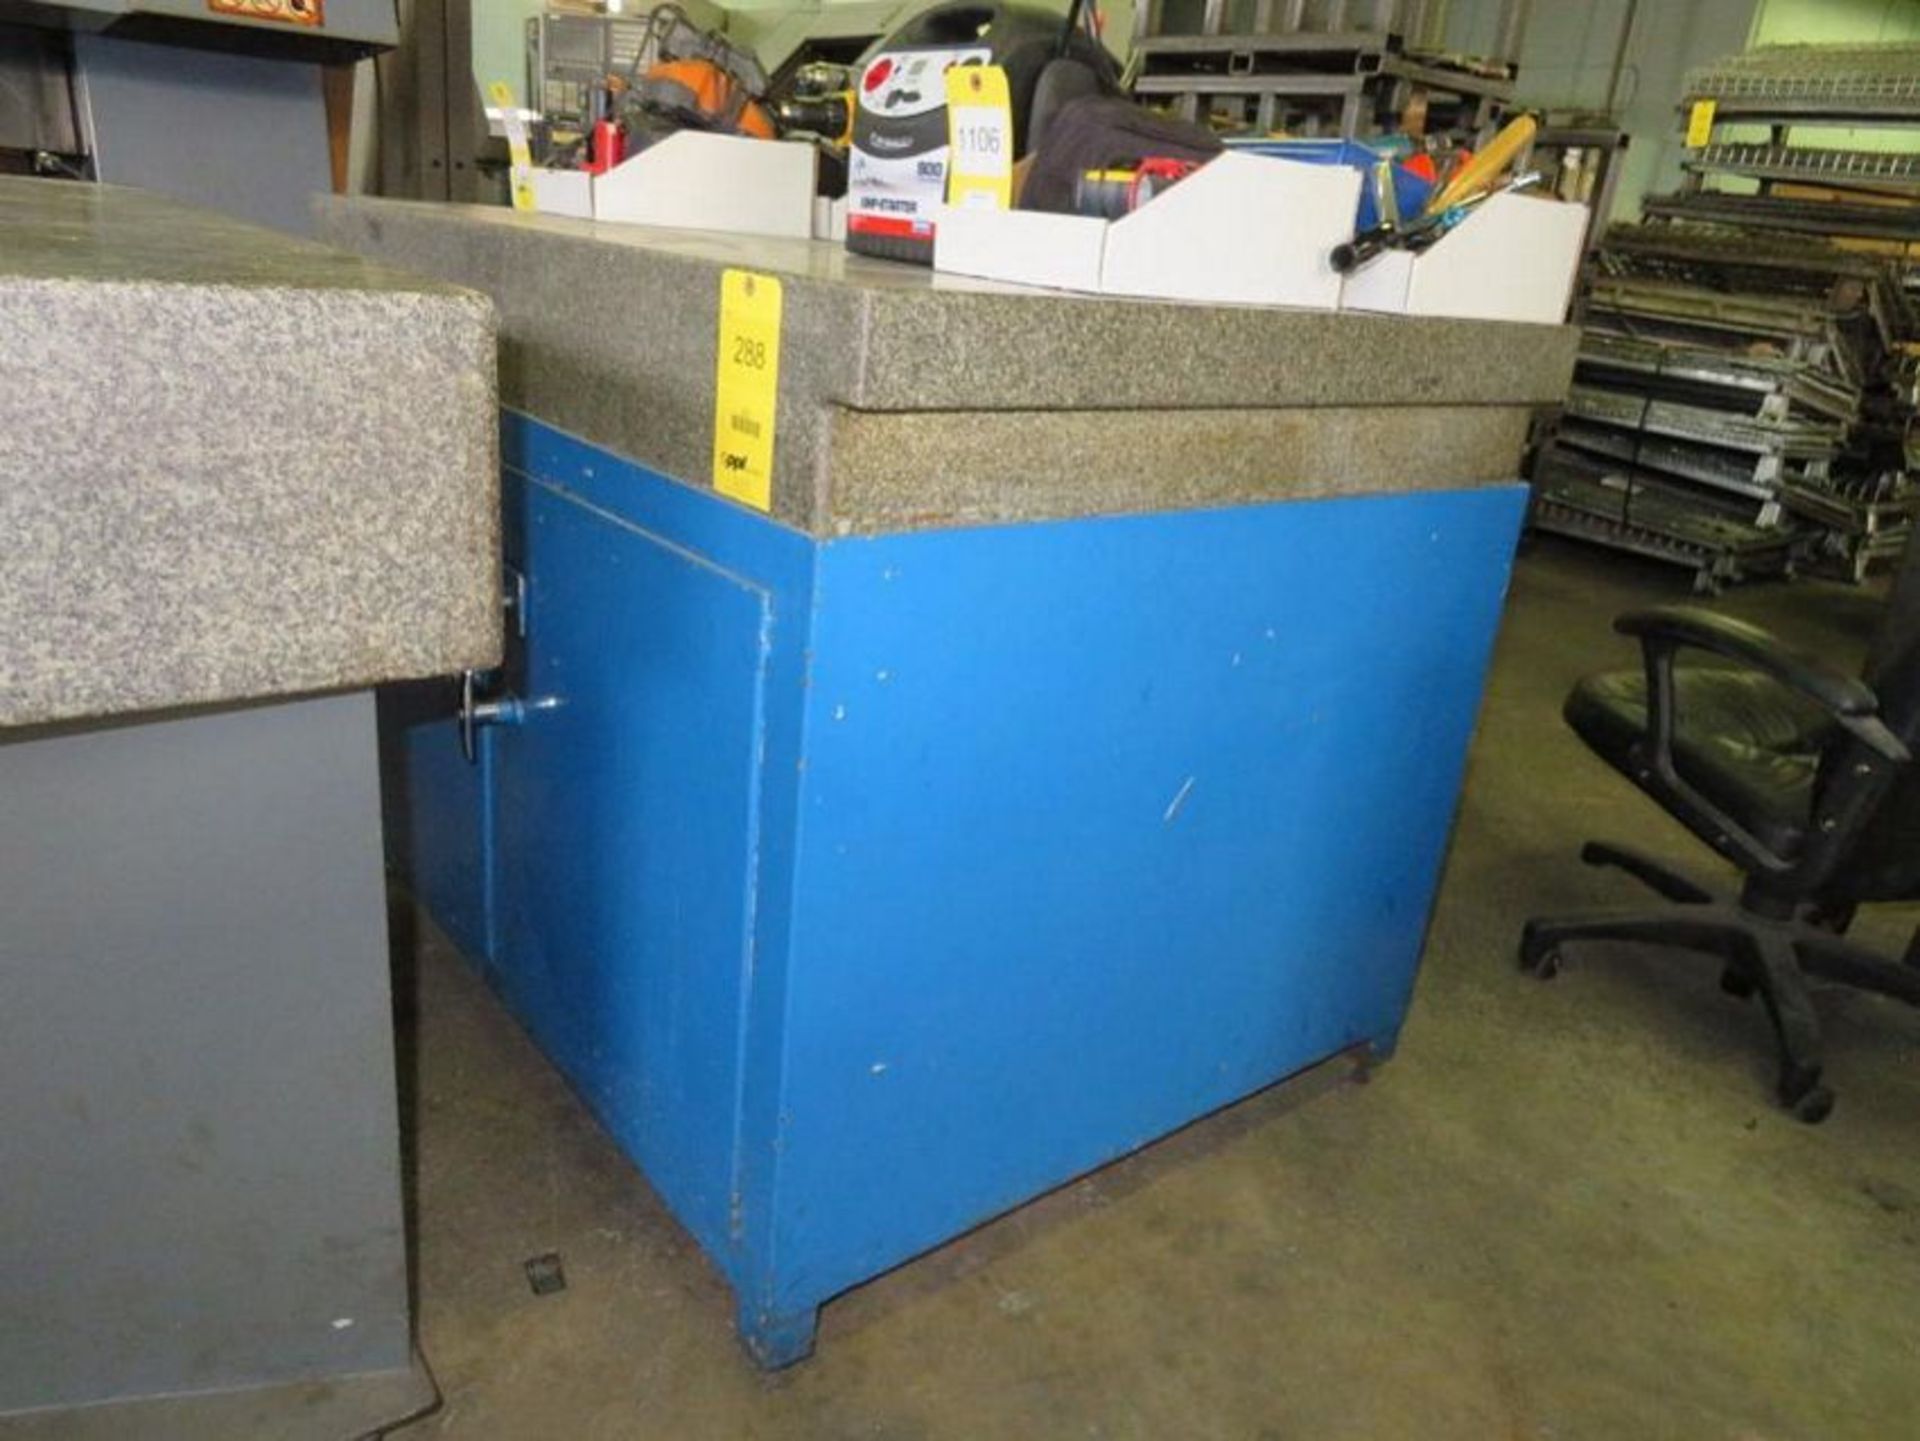 36 in. x 48 in. x 8 in. Granite Surface Plate on Steel Stand (Building #2)